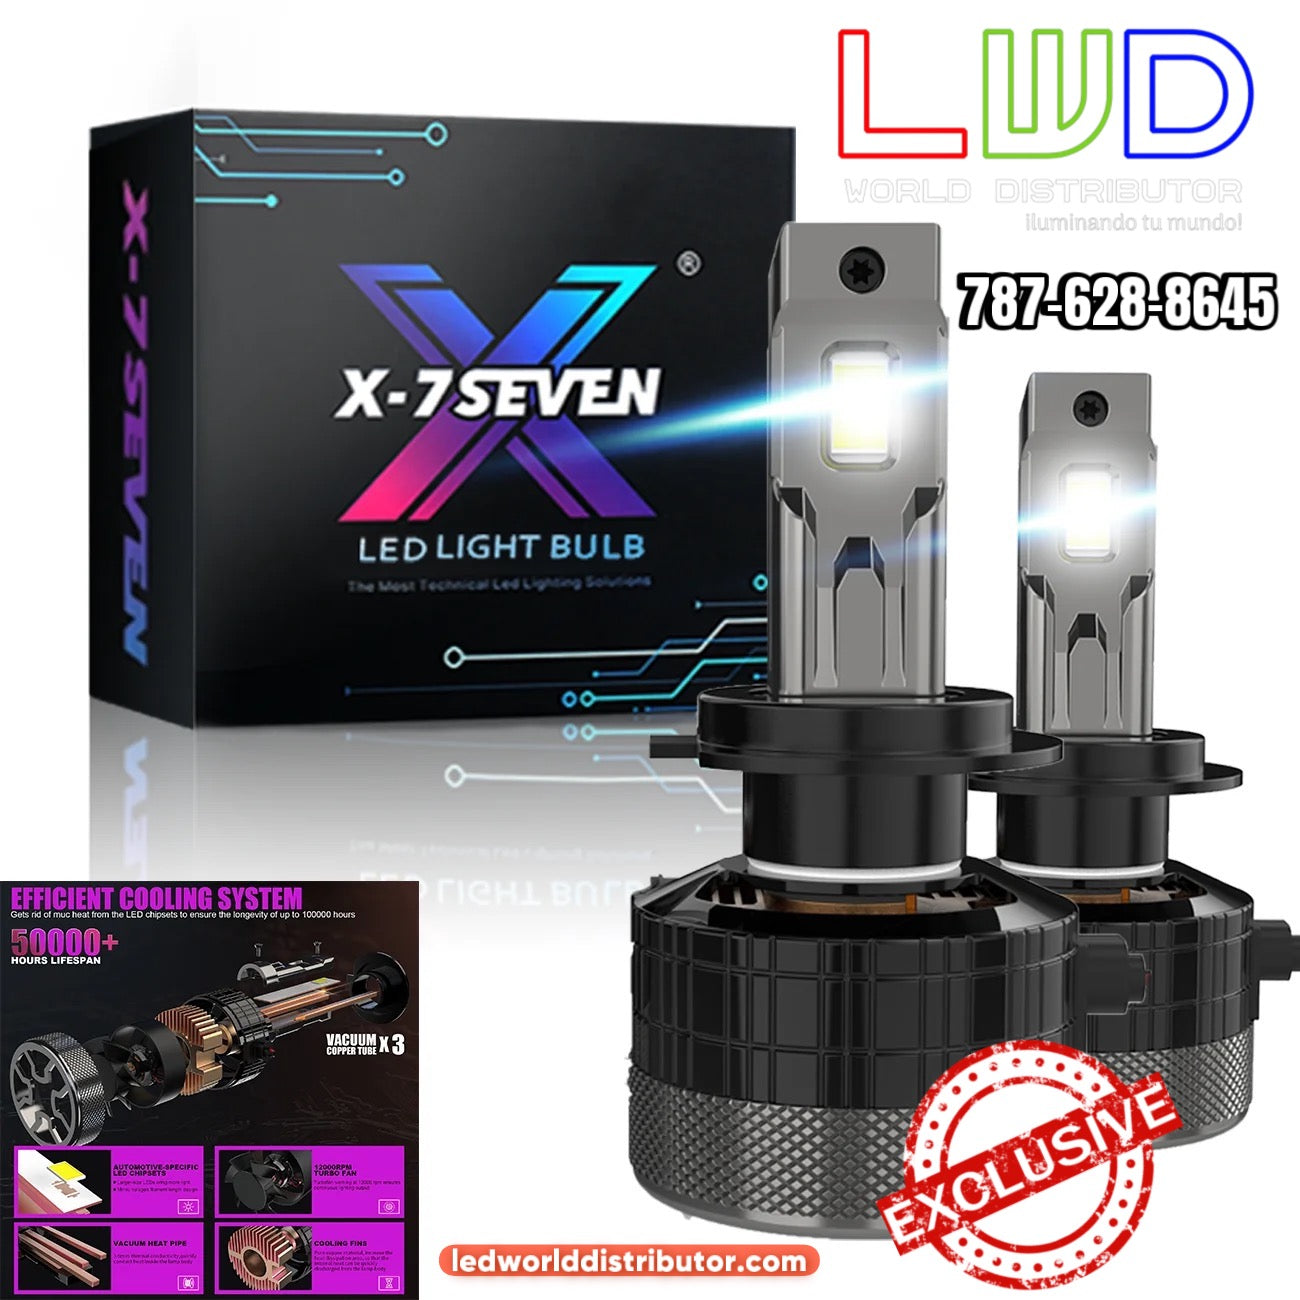 X-7SEVEN x-Black Samurai series, 250w,55000lm,6500k,h4,h7,h1,h11,9005,with Canbus